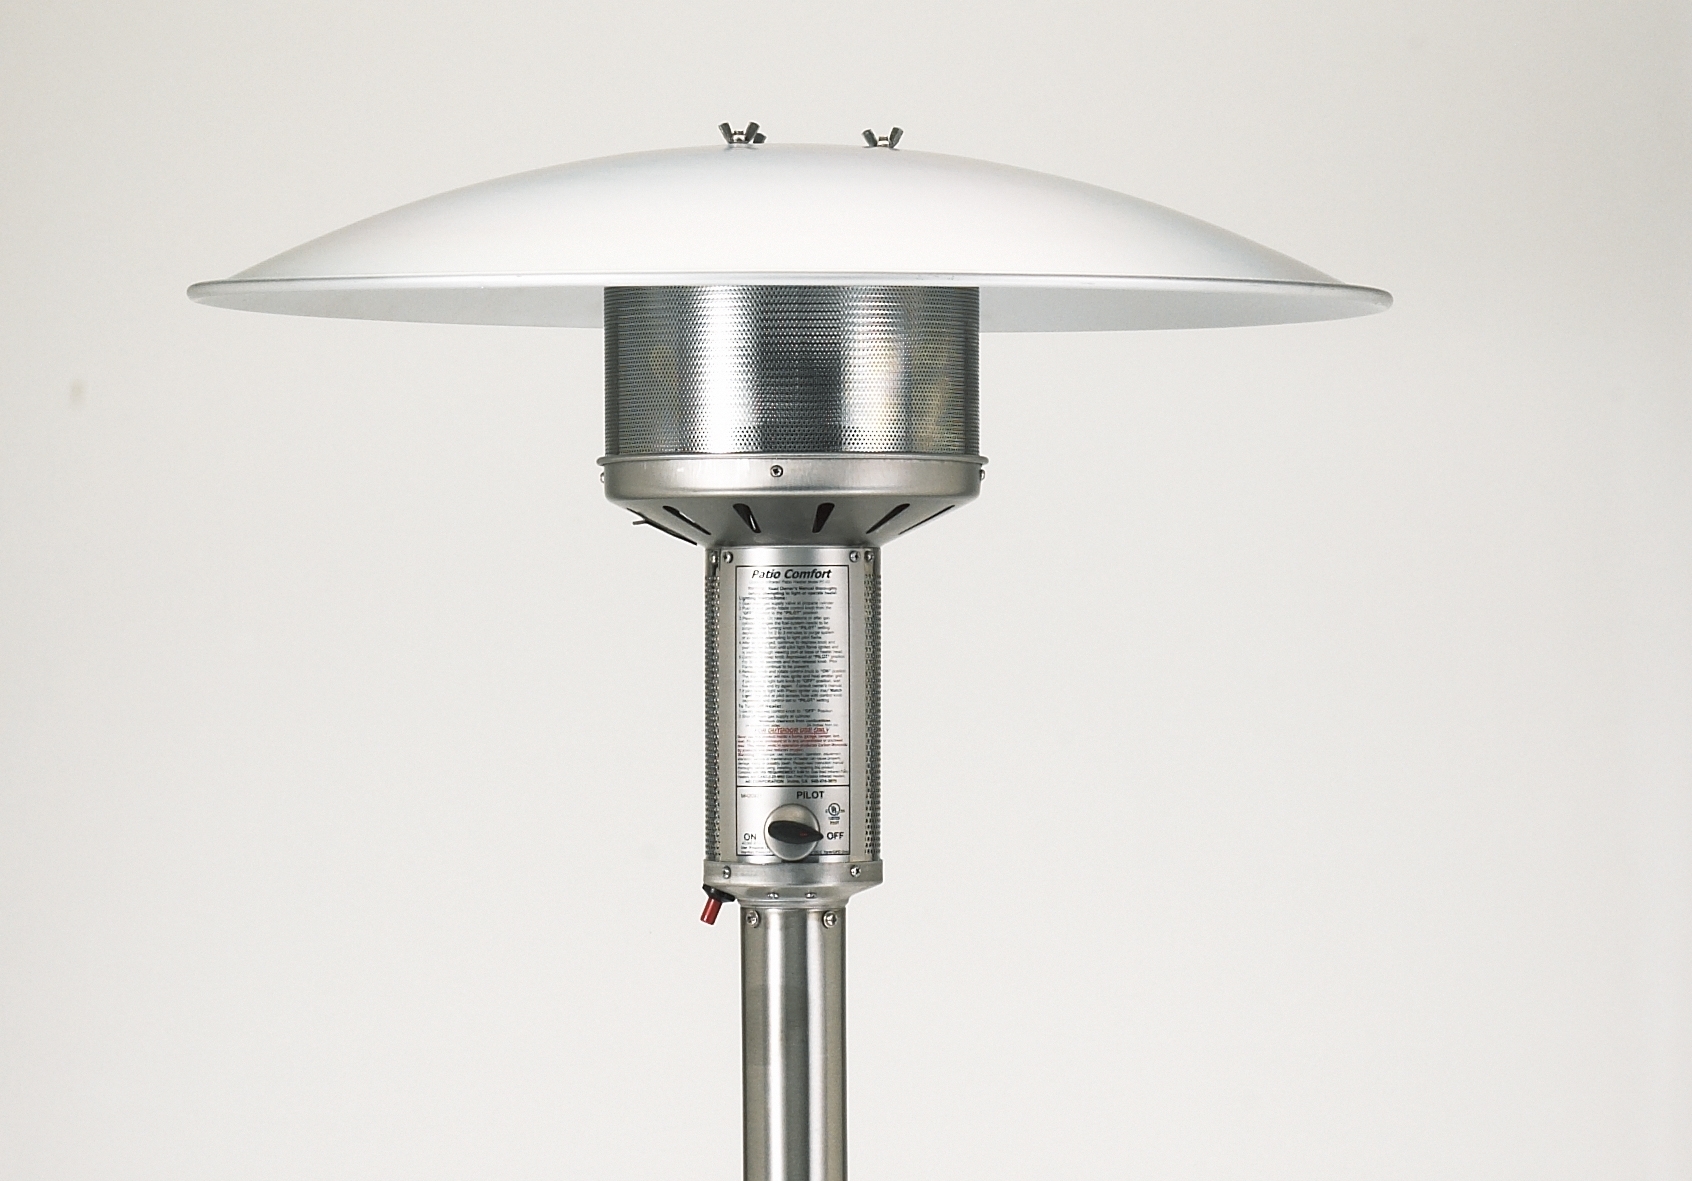 patio comfort ng permanent heater – stainless steel product image